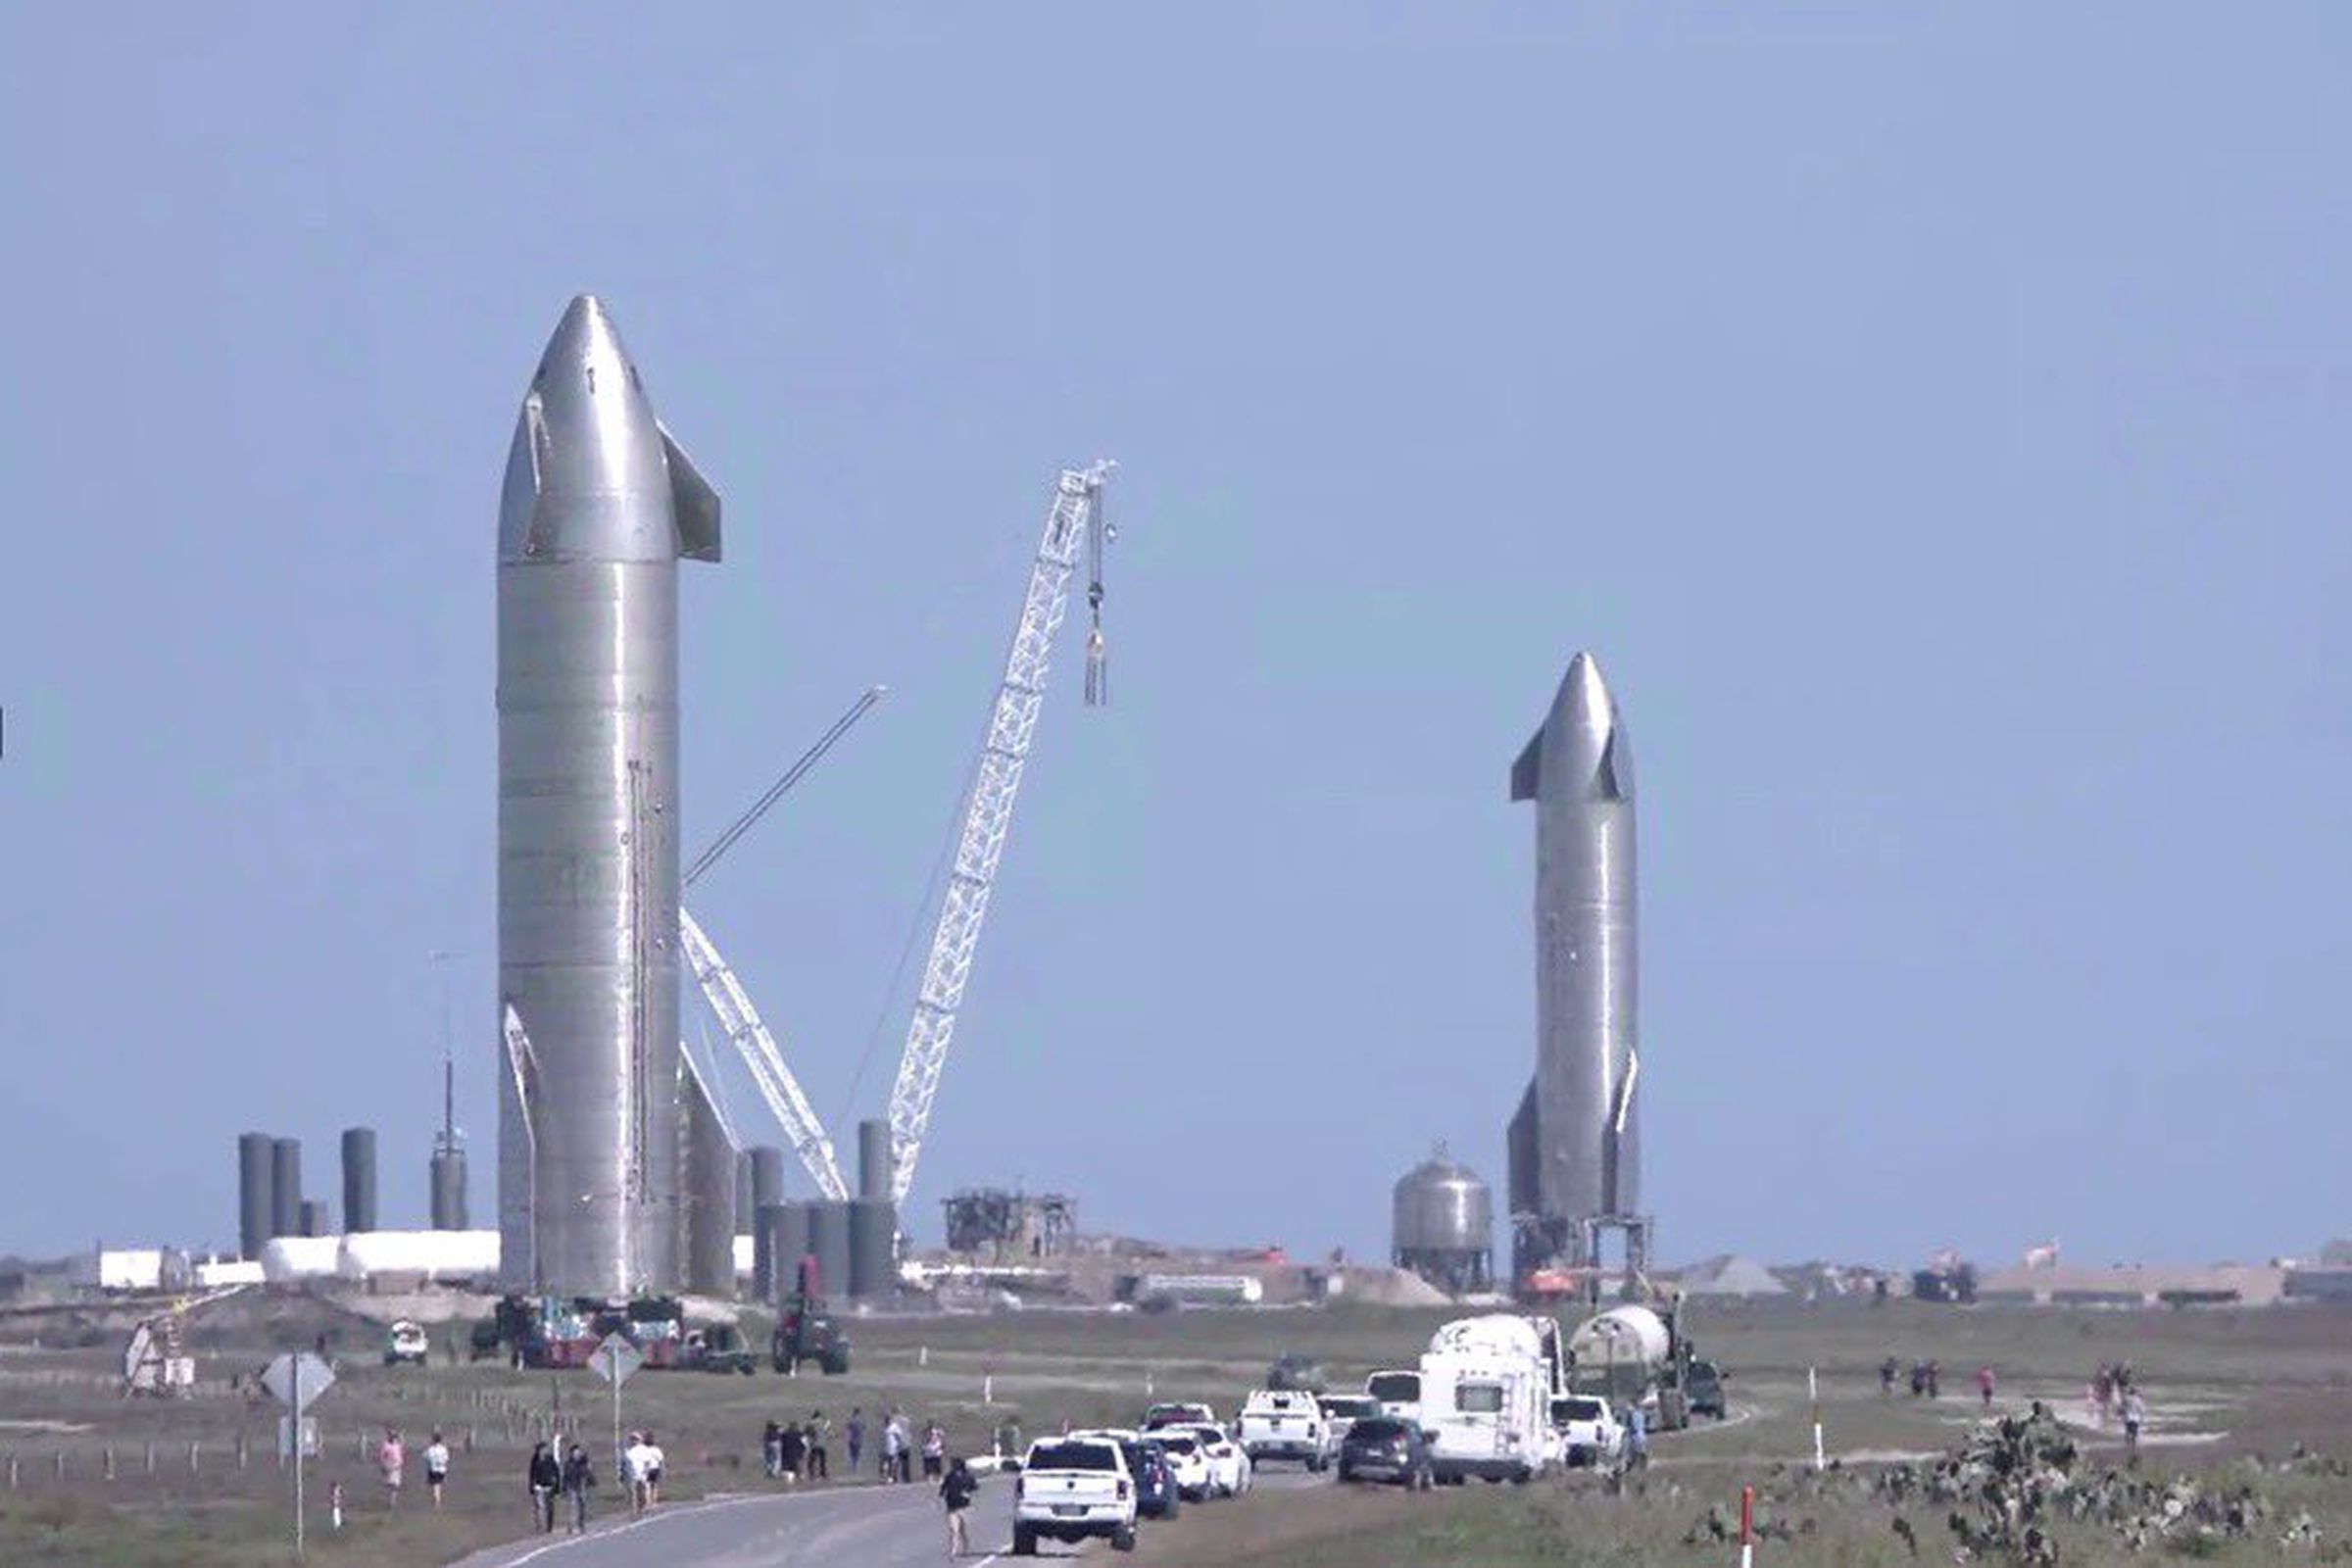 Two since-destroyed Starship prototypes stand erect at SpaceX’s Boca Chica, Texas Starship facilities.